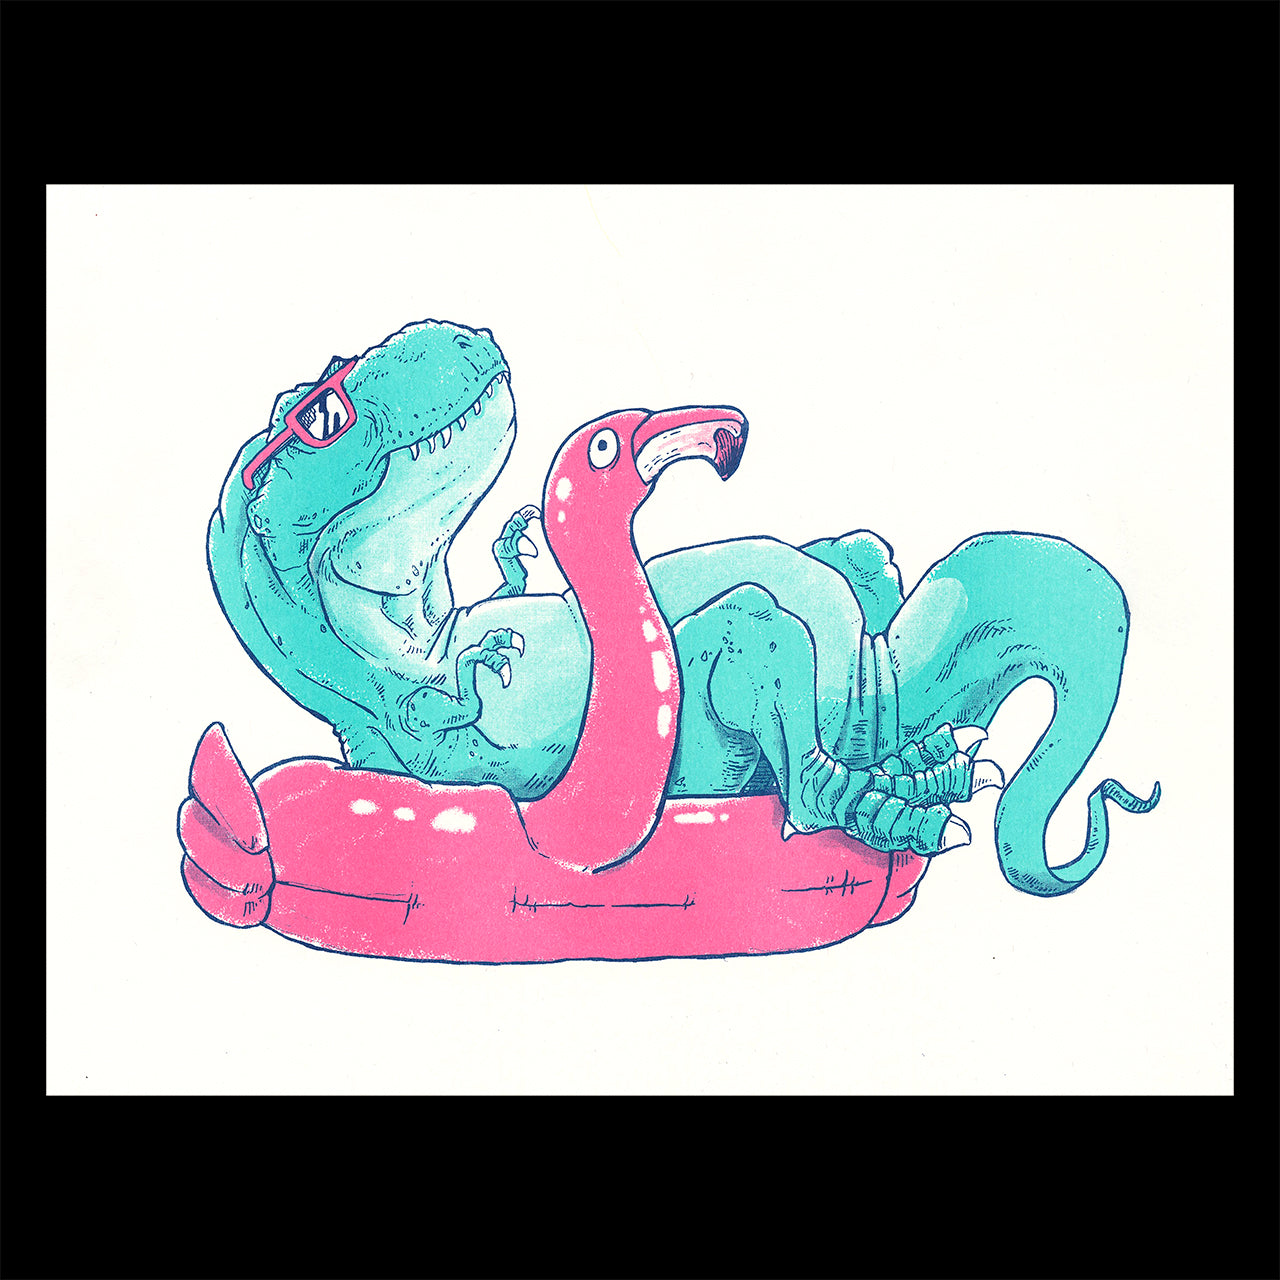 Risograph printed illustration of a t-rex with sunglasses relaxing in an inflatable flamingo pool lounger